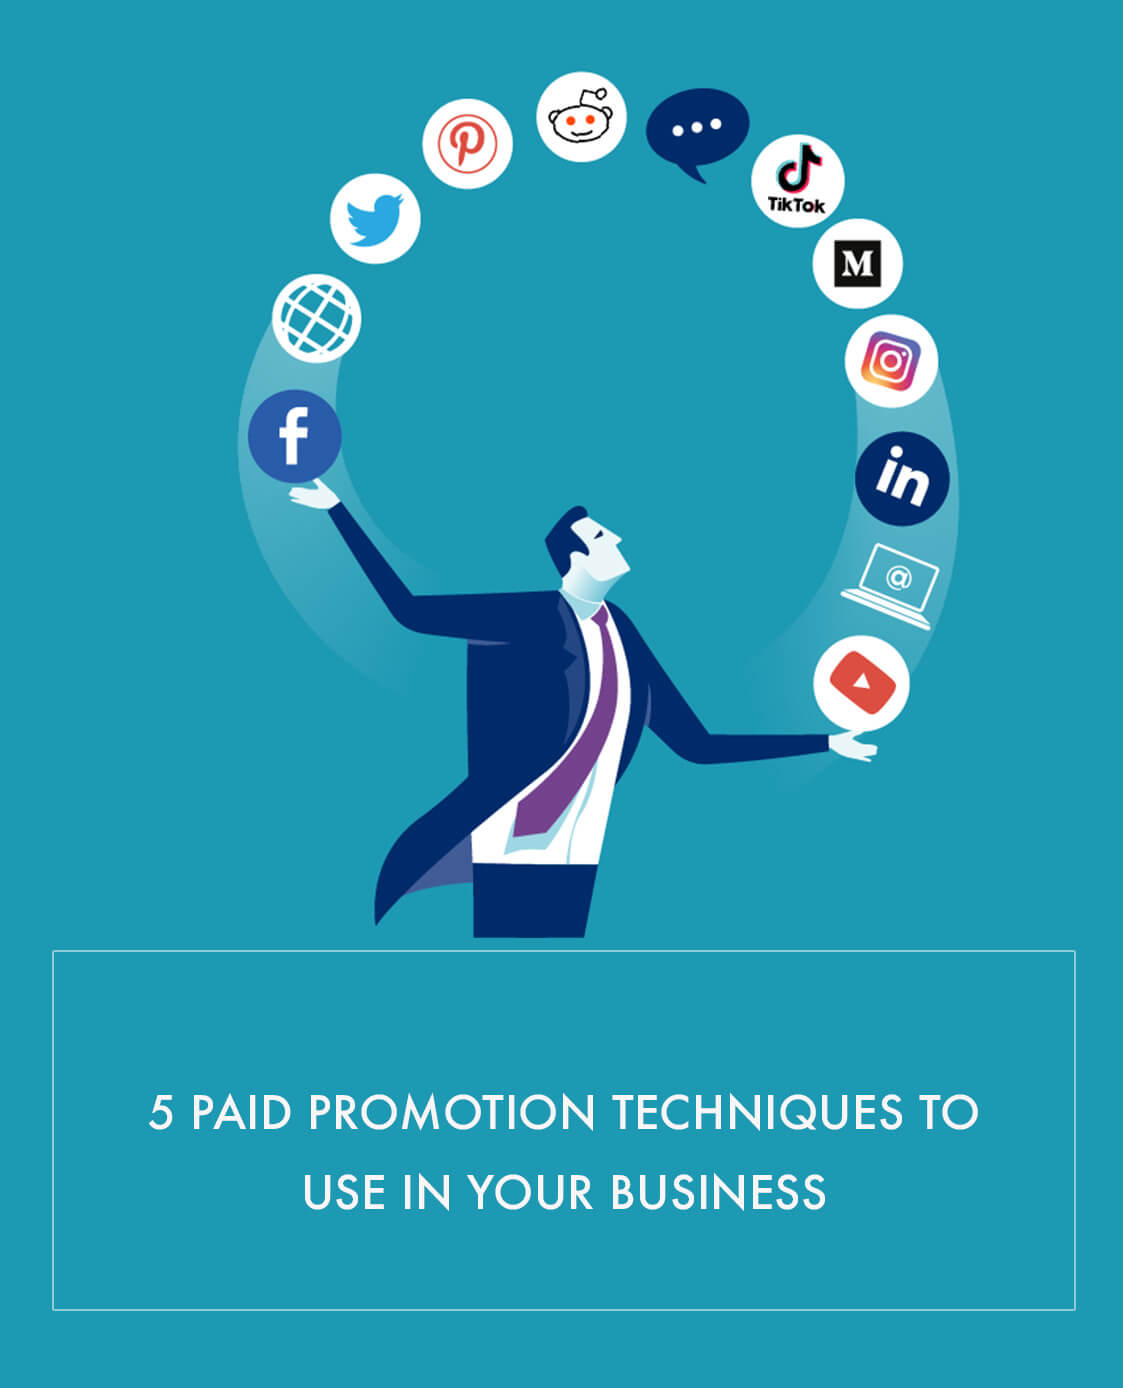 5 Paid Promotion Techniques to Use in Your Business